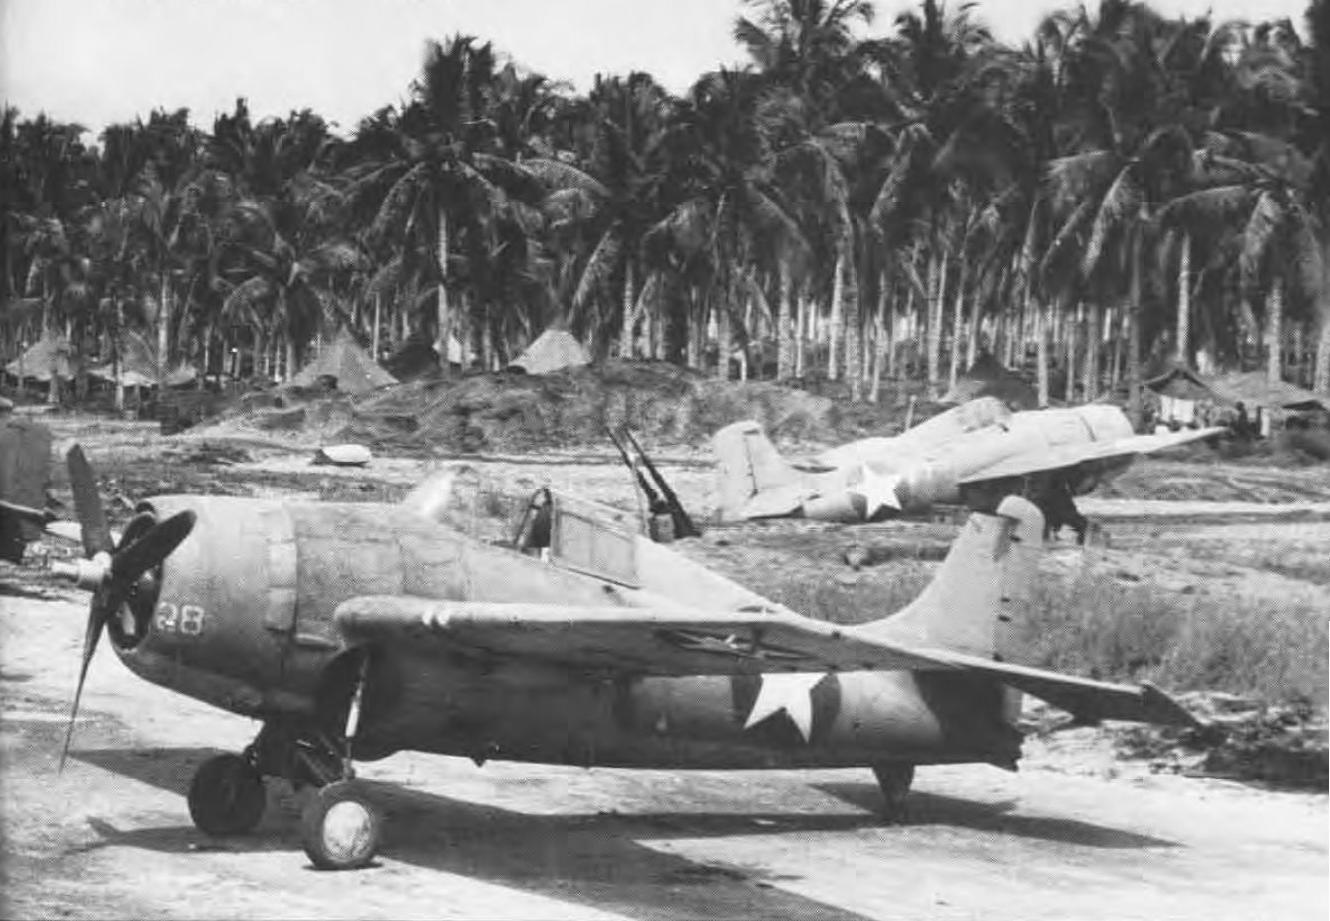 F4F Wildcat fighters of the US Navy and US Marines lined up on Henderson Field on Guadalcanal, Solomon Islands, Jan 1943, photo 2 of 2